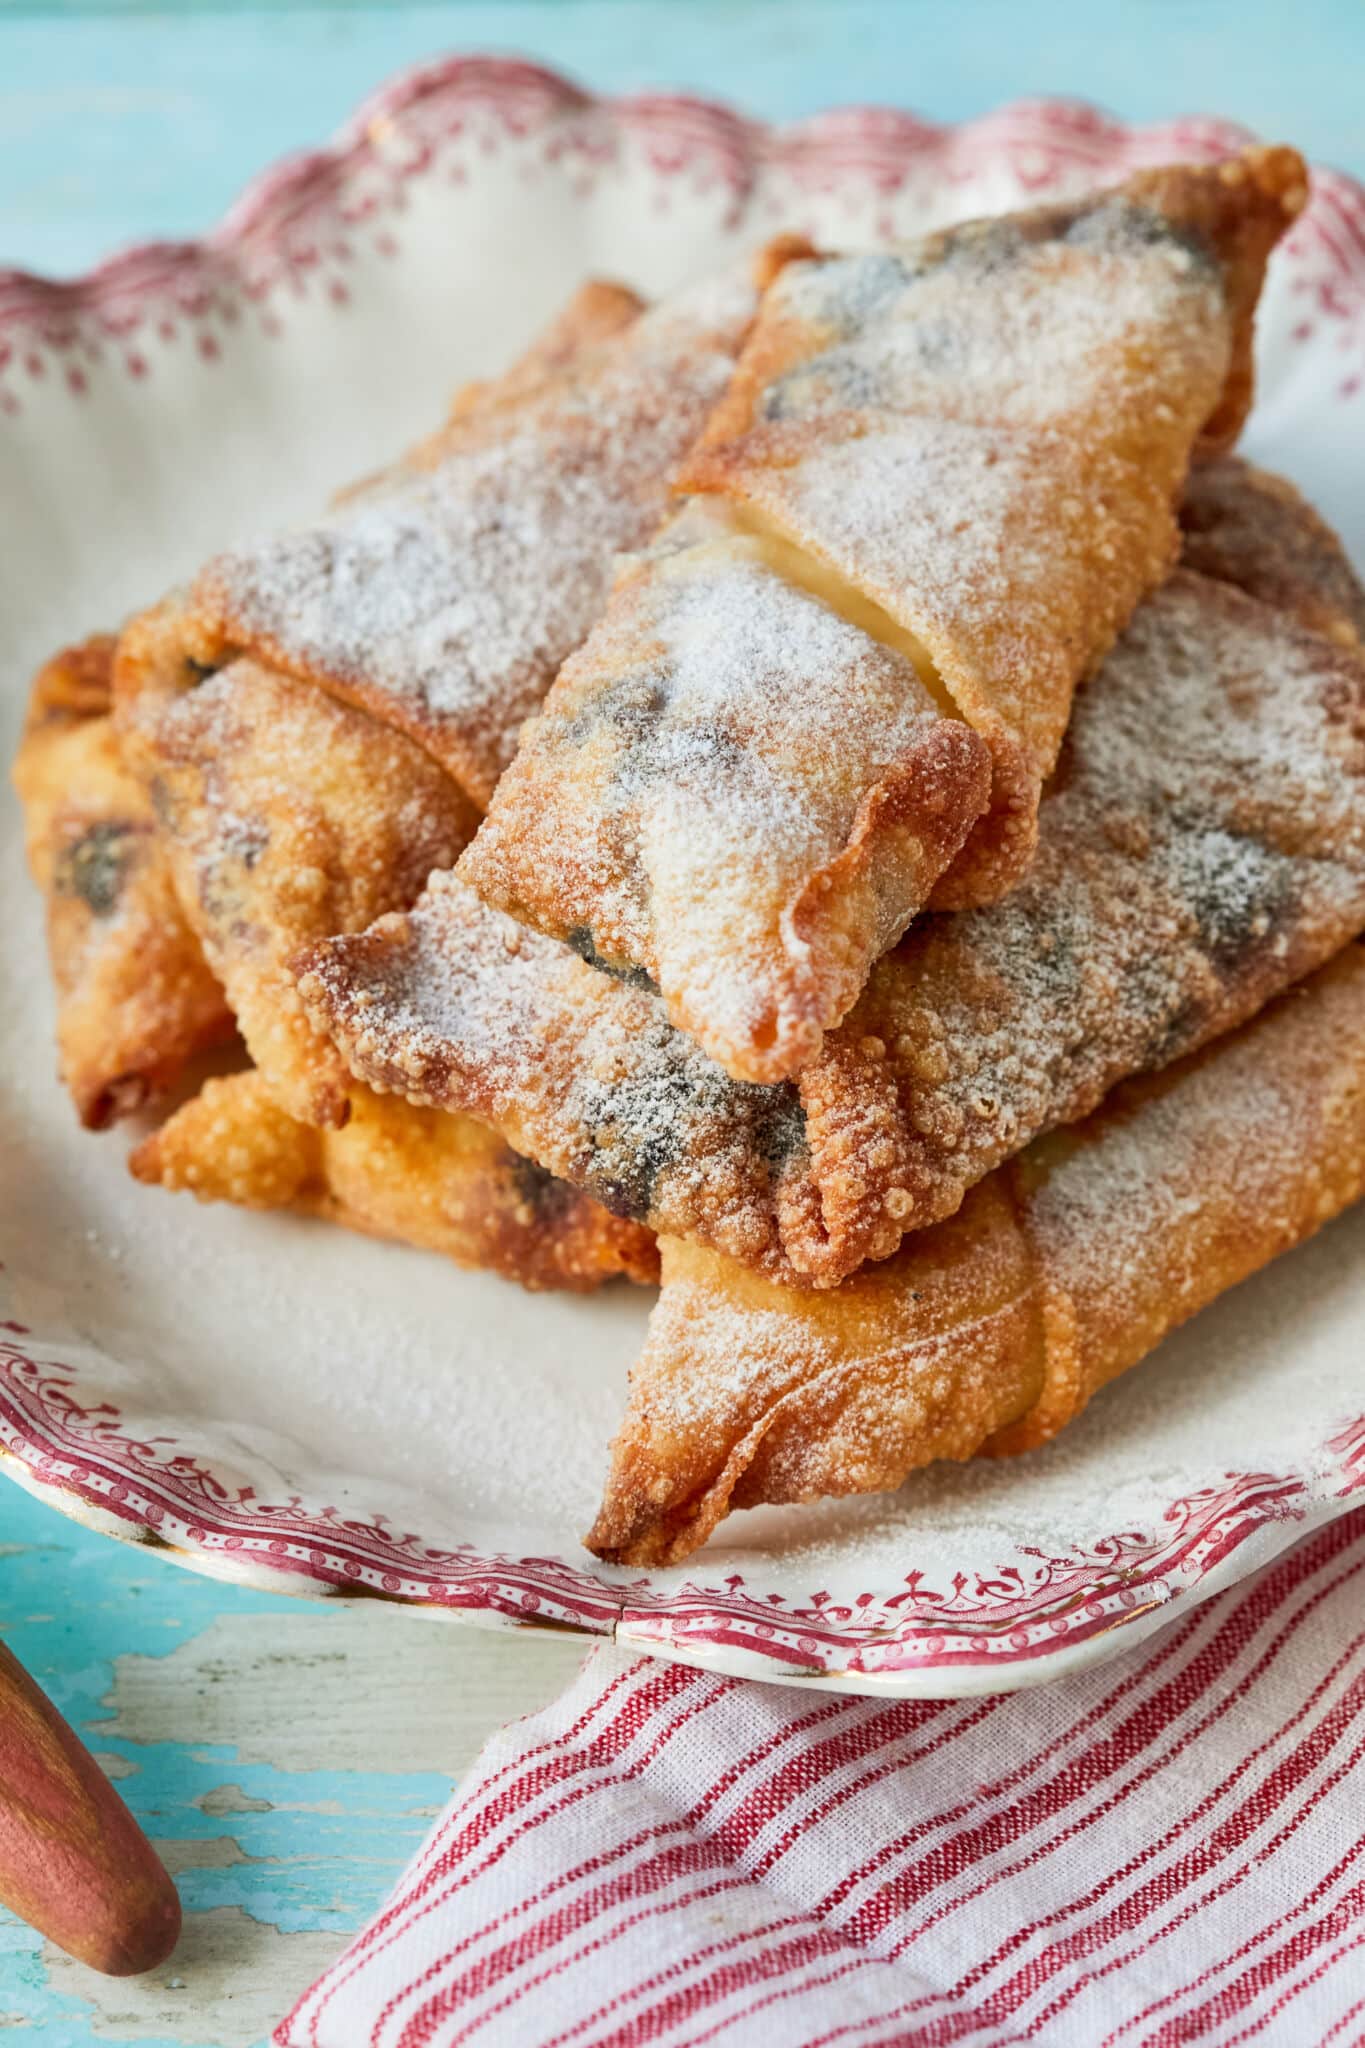 Golden crispy Blueberry Cheesecake Egg Rolls are dusted with powdered sugar, served on a red-edge platter. 